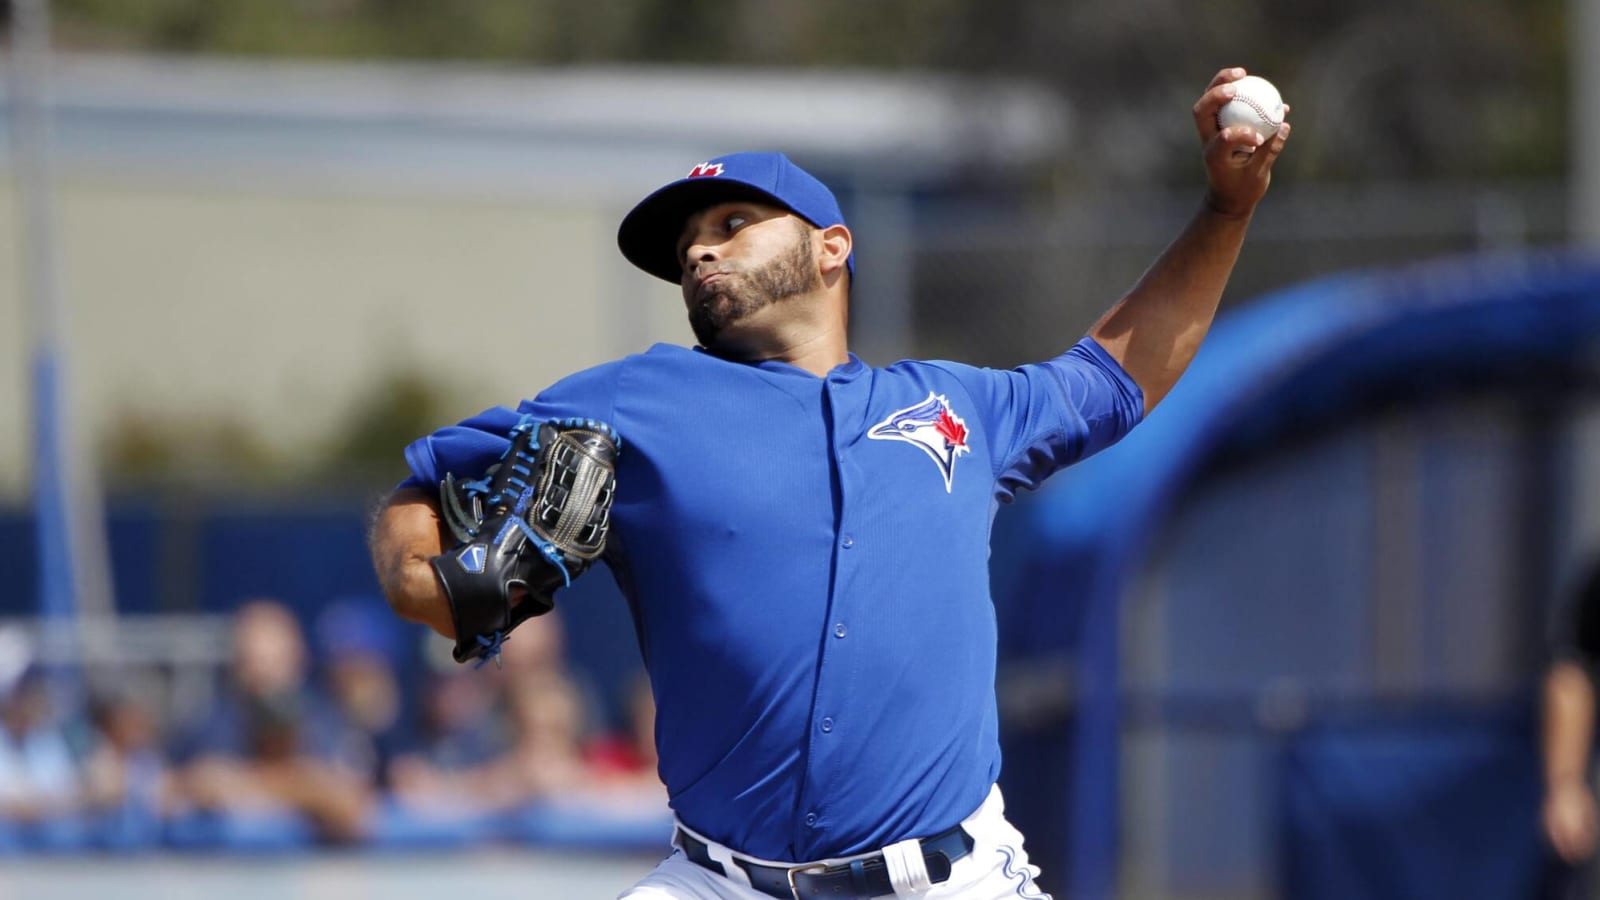 Under the C’s – Former Blue Jay Ricky Romero is coming to Vancouver